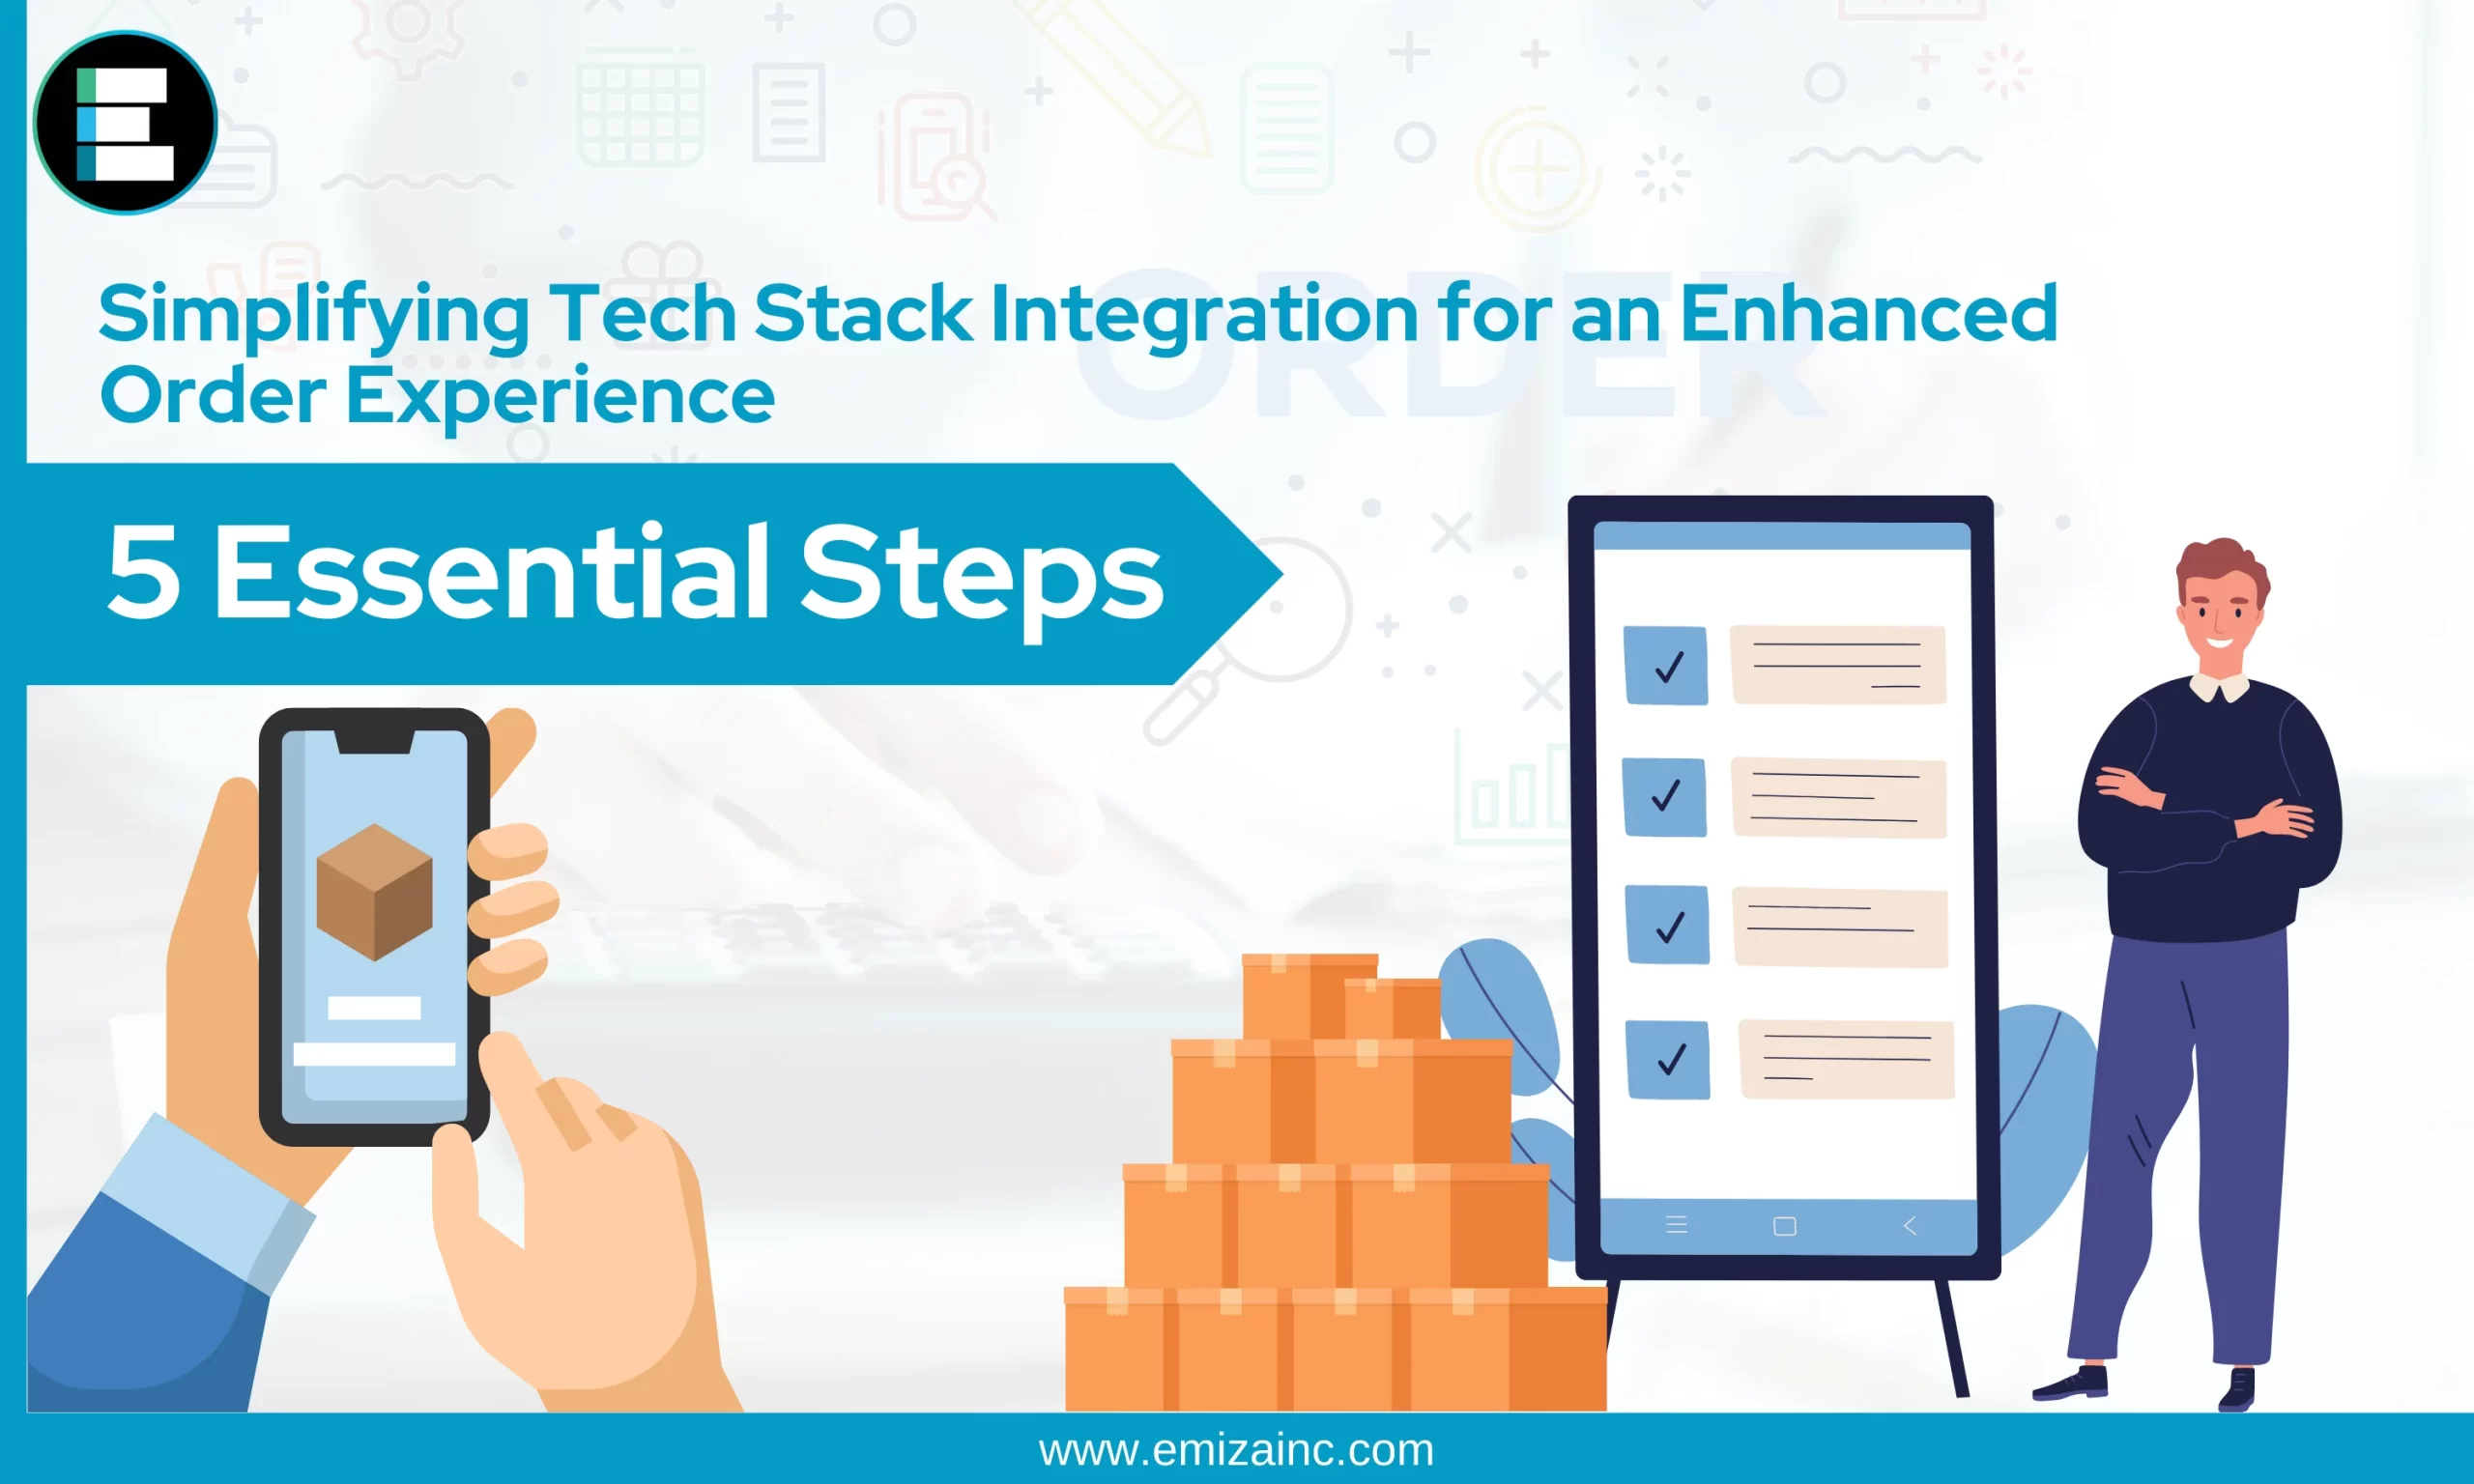 Simplifying Tech Stack Integration for an Enhanced Order Experience: 5 Essential Steps